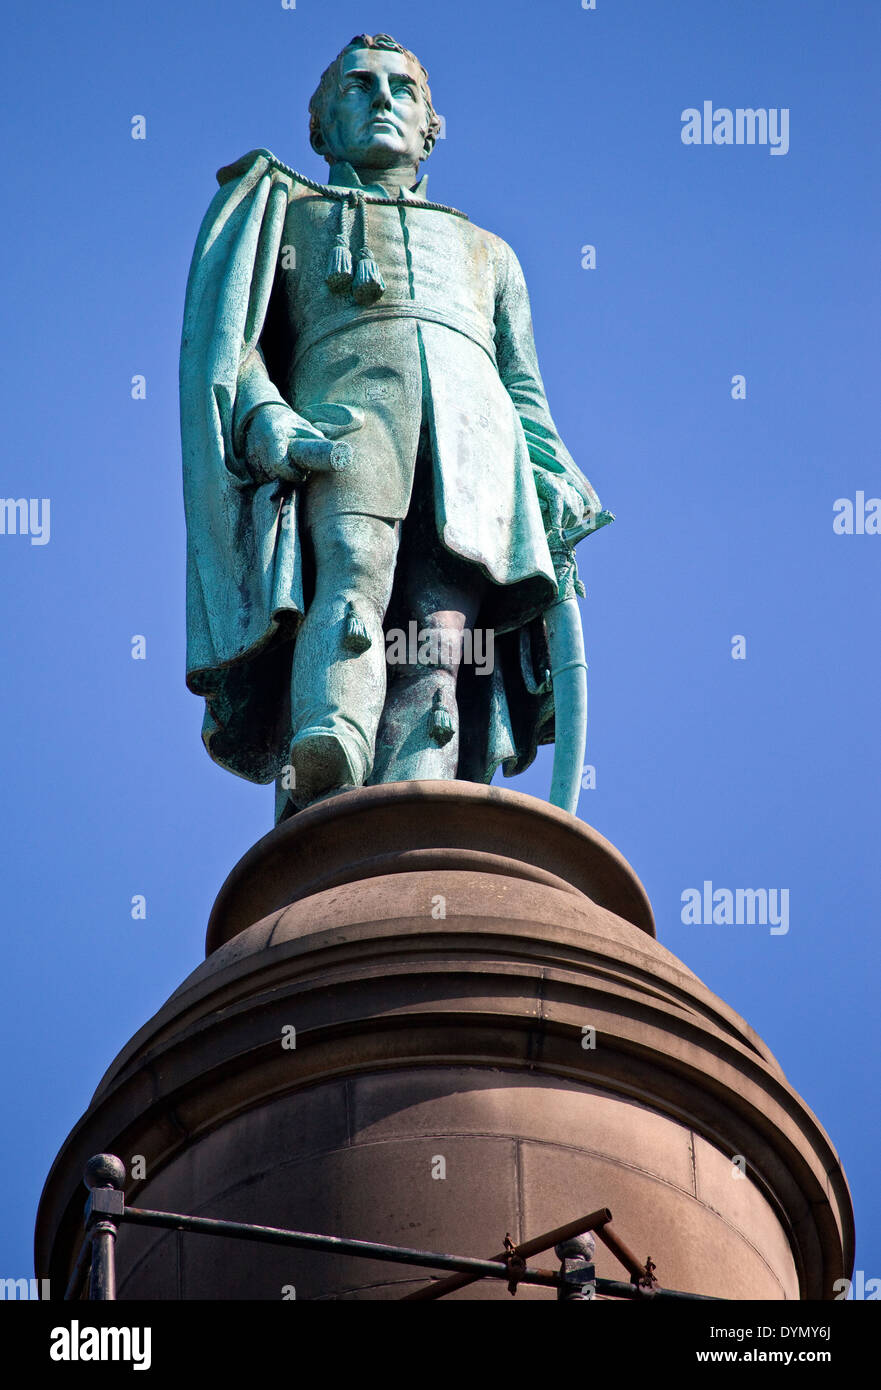 A statue of the Duke of Wellington situated on top of Wellington's Column (or also known as the Waterloo Memorial) in Liverpool. Stock Photo